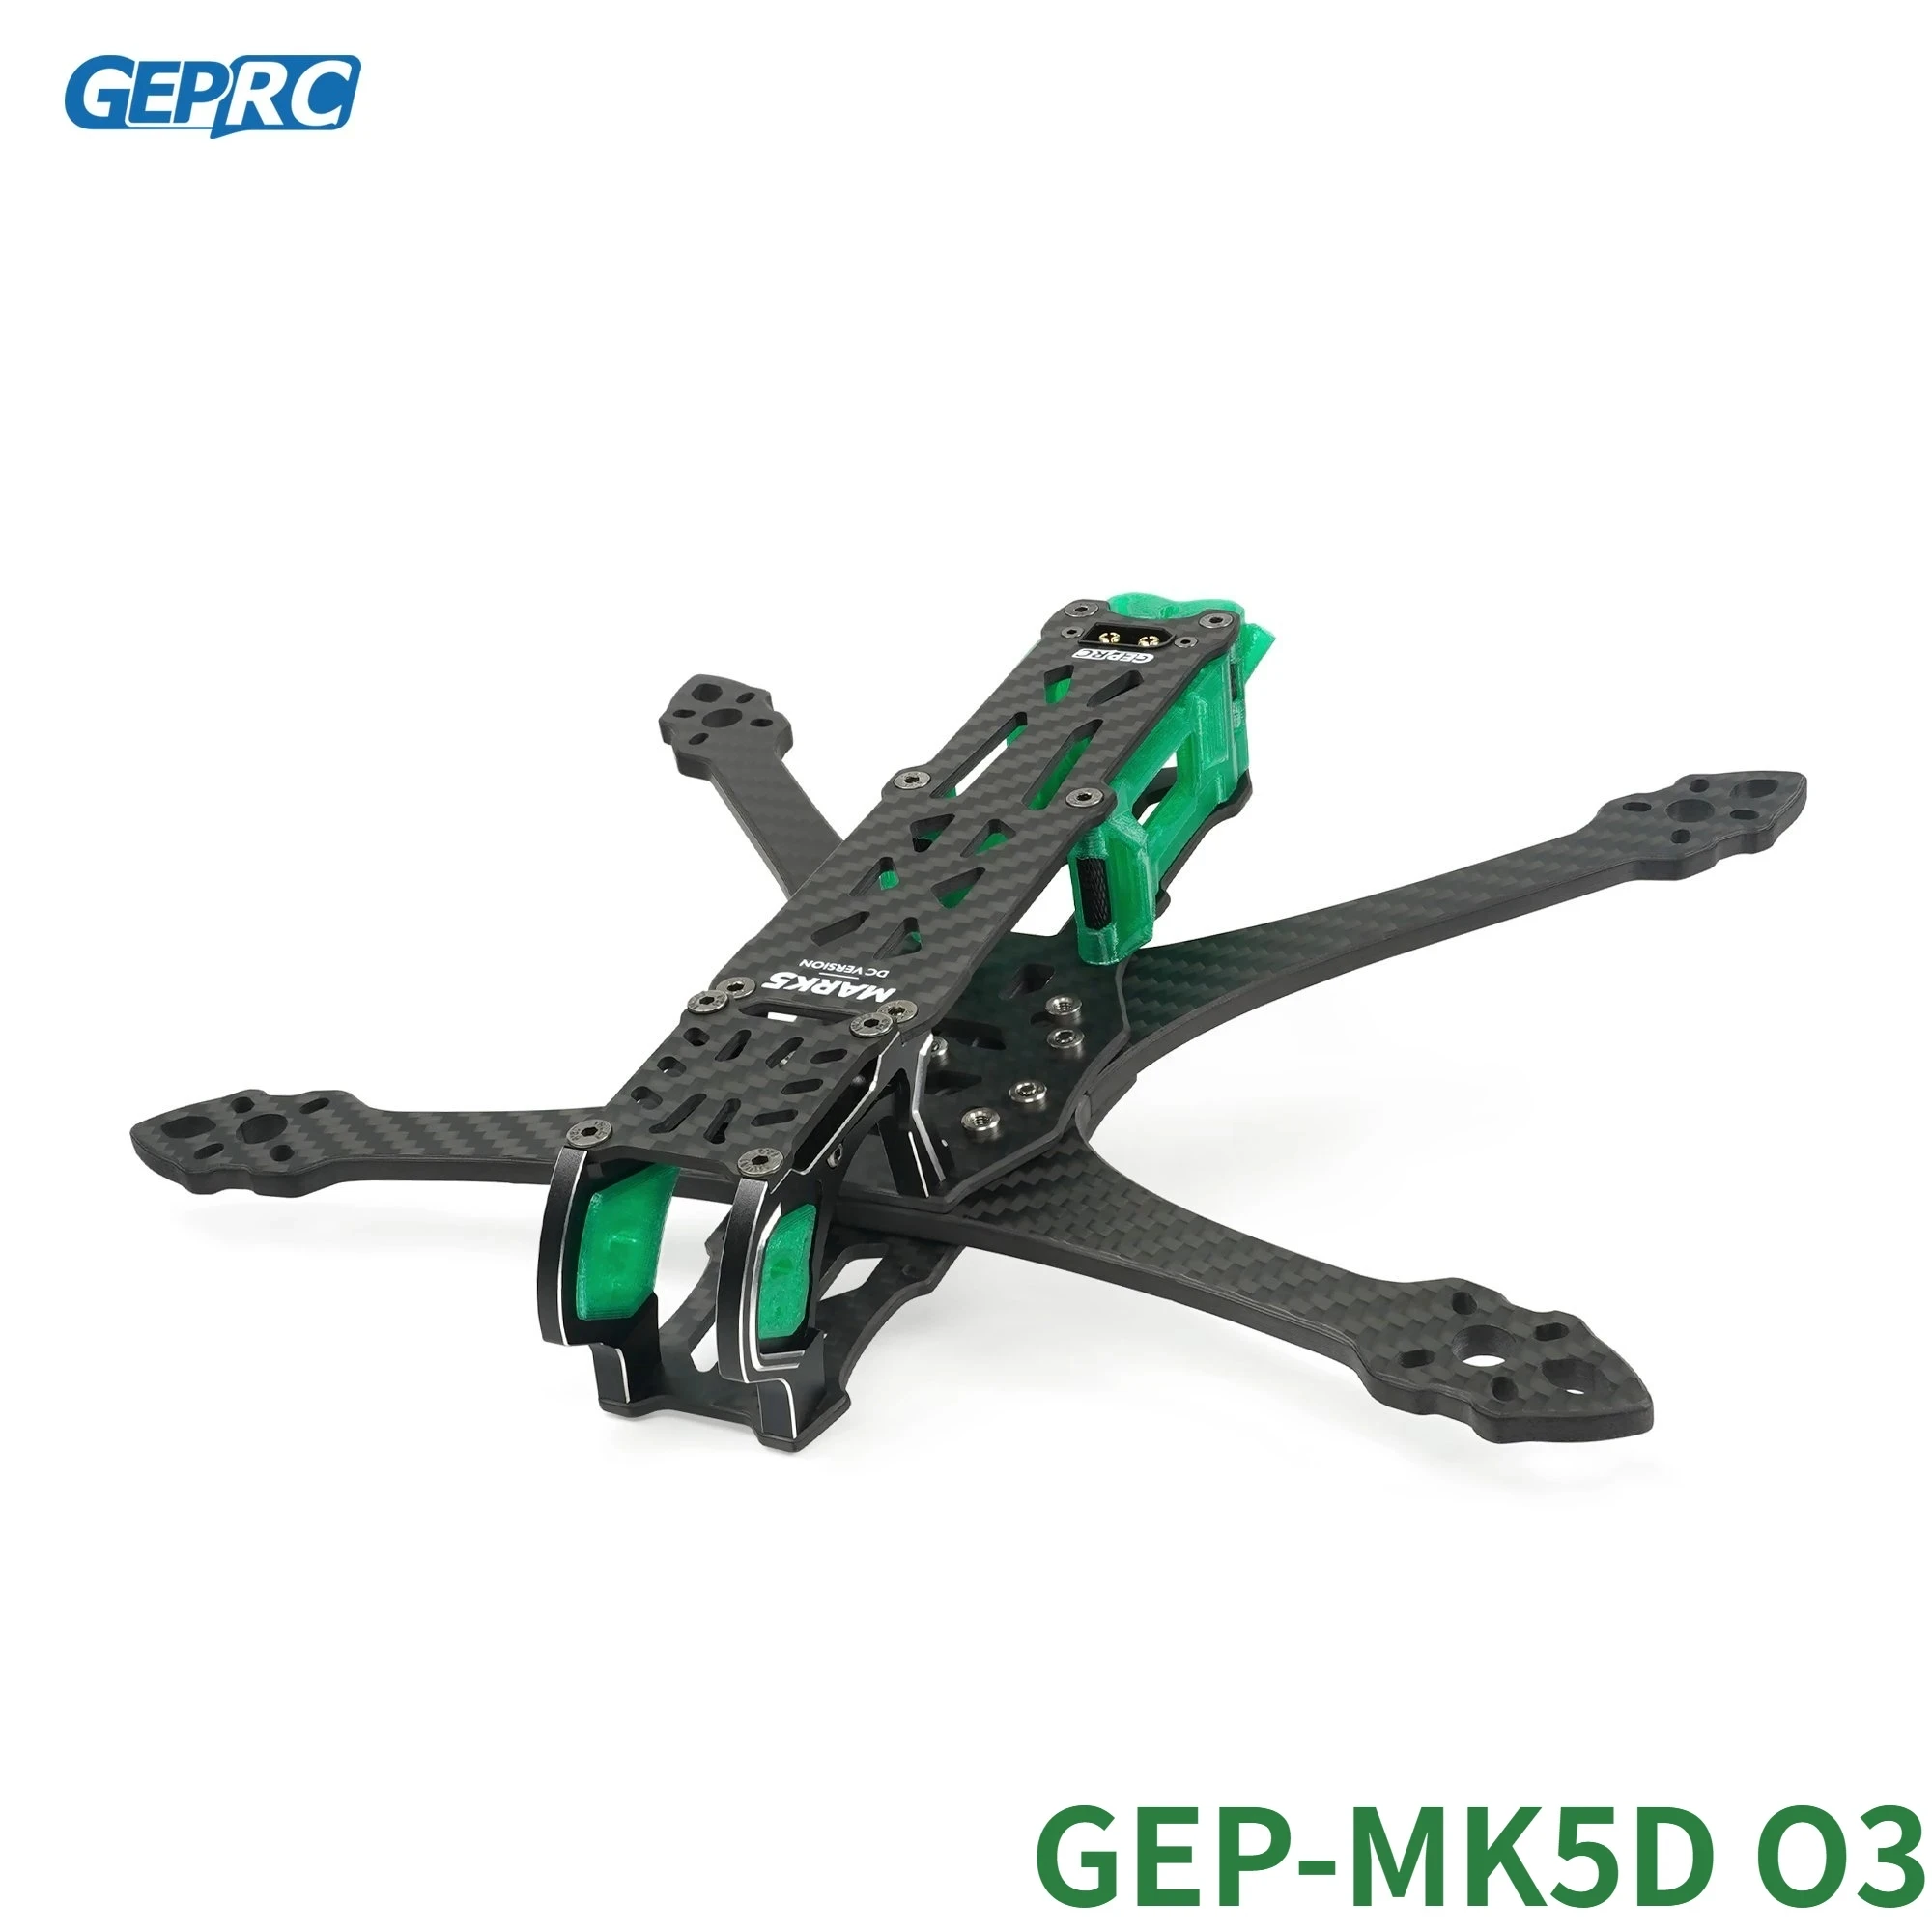 

GEPRC GEP-MK5D O3 MK5X to MK5D Conve DeadCat Frame Parts Propeller Accessory Base Quadcopter FPV Freestyle RC Racing Drone Mark5